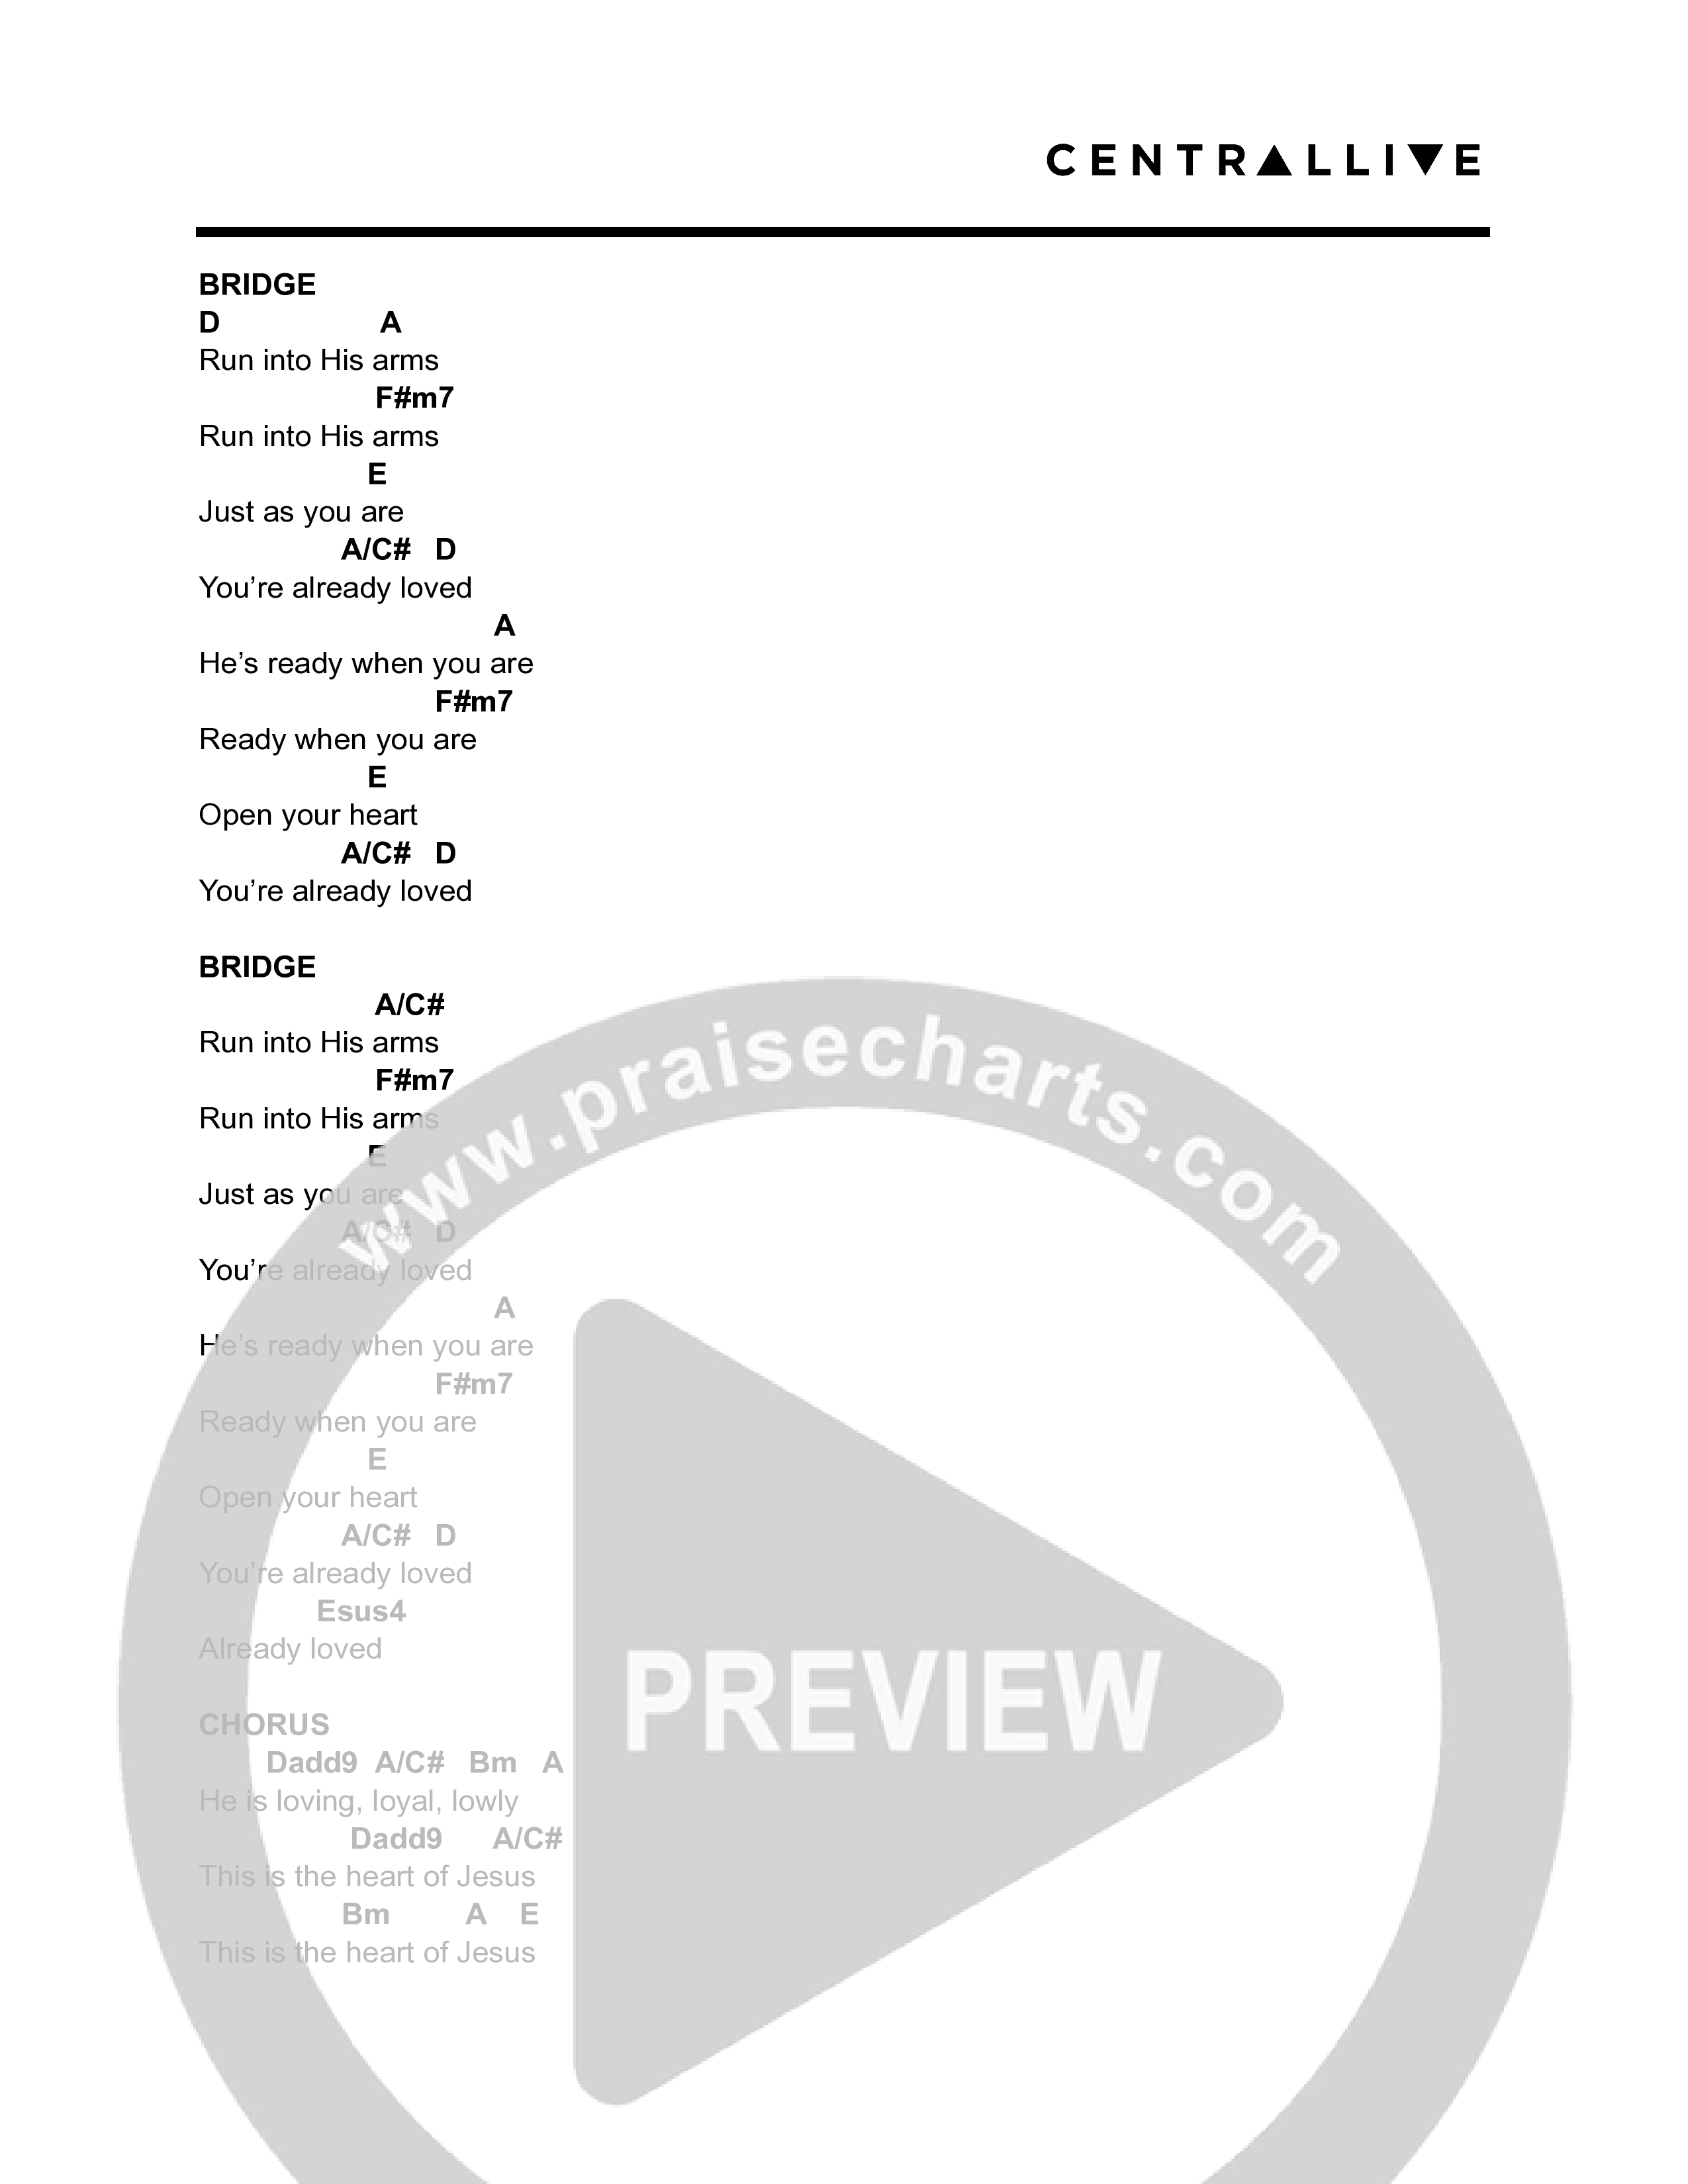 The Heart Of Jesus Chord Chart (Central Live)